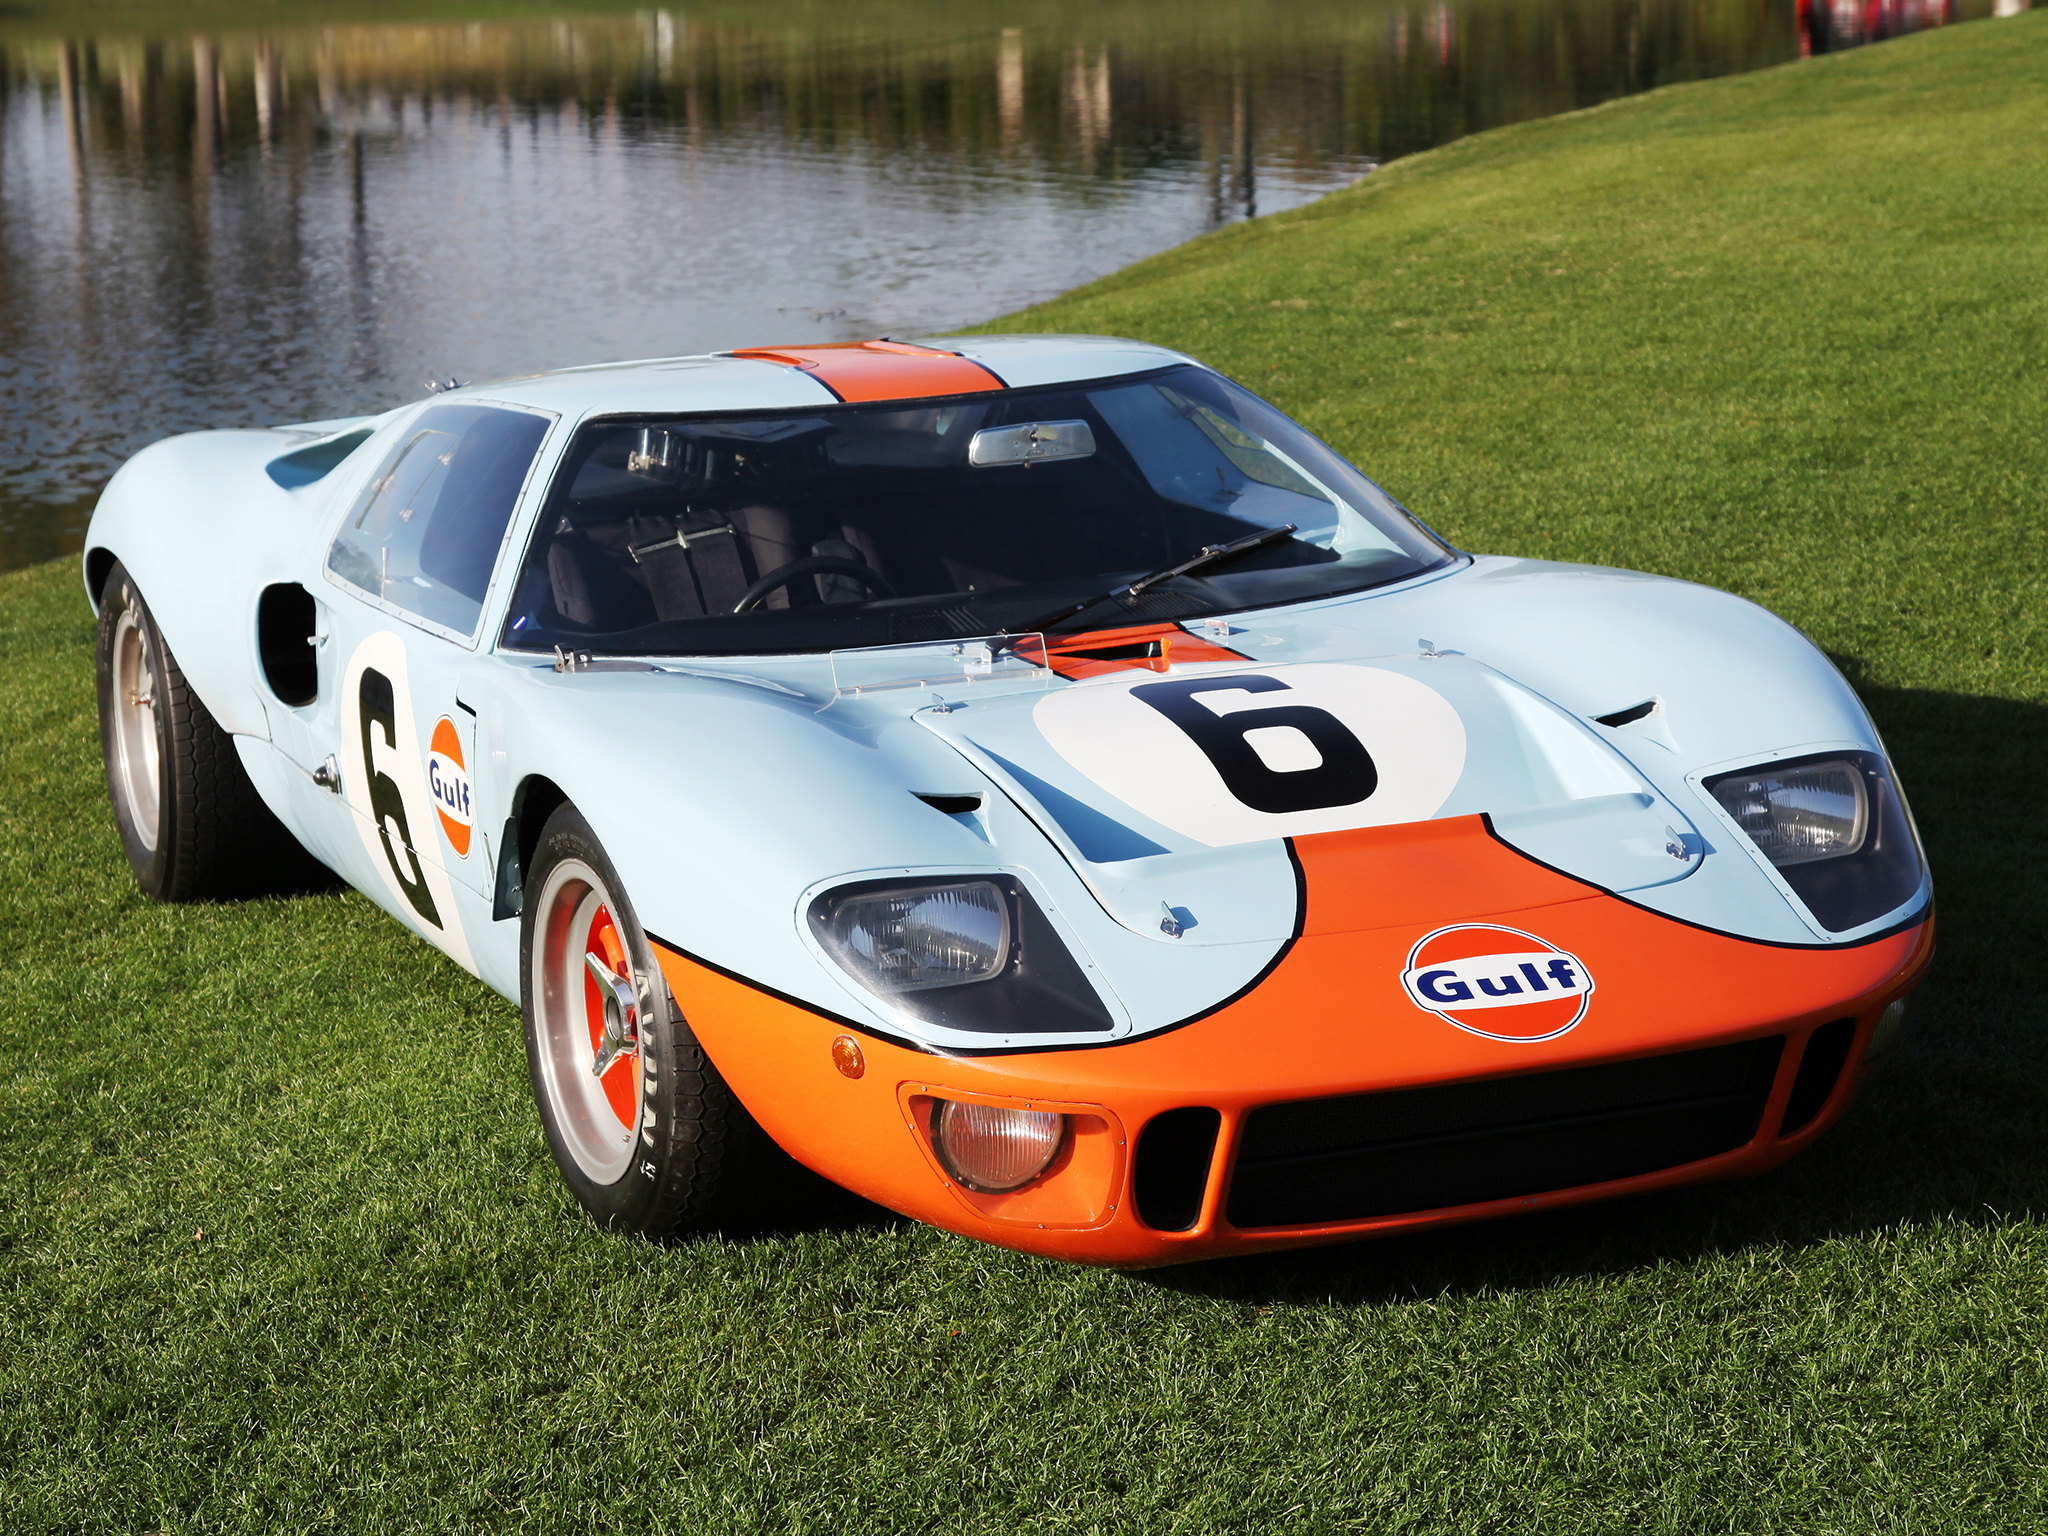 1968, Ford, Gt40, Gulf oil, Le mans, Race, Racing, Supercar, Classic, Hh Wallpaper